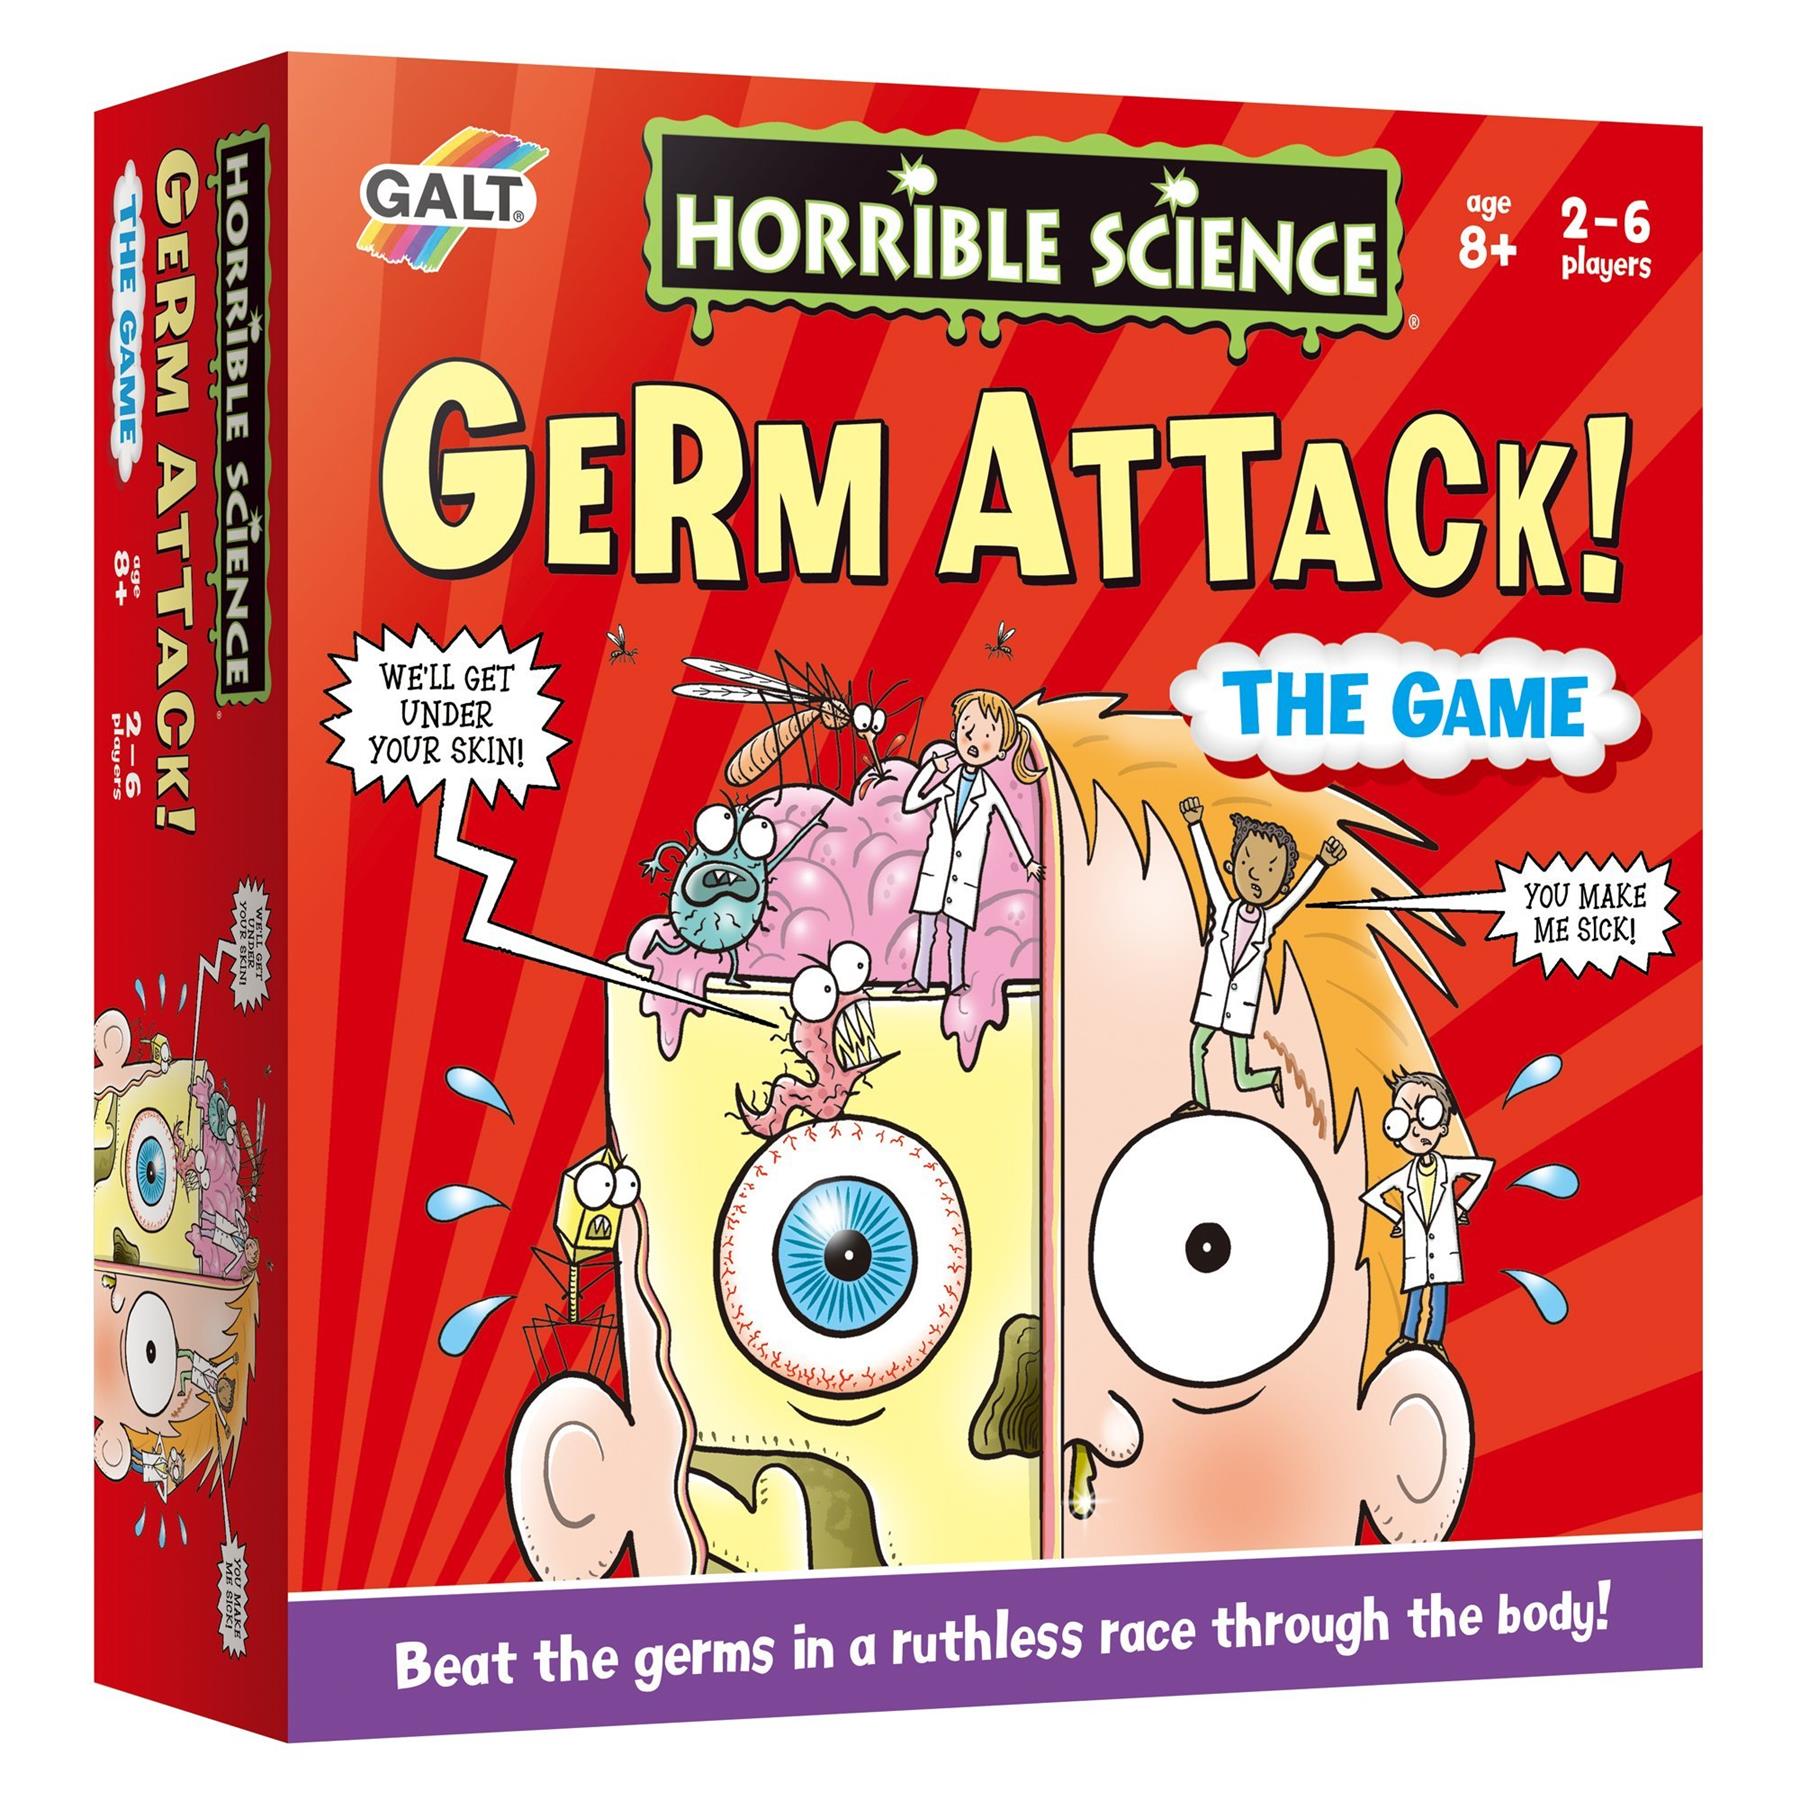 Galt Toys Horrible Science Germ Attack!